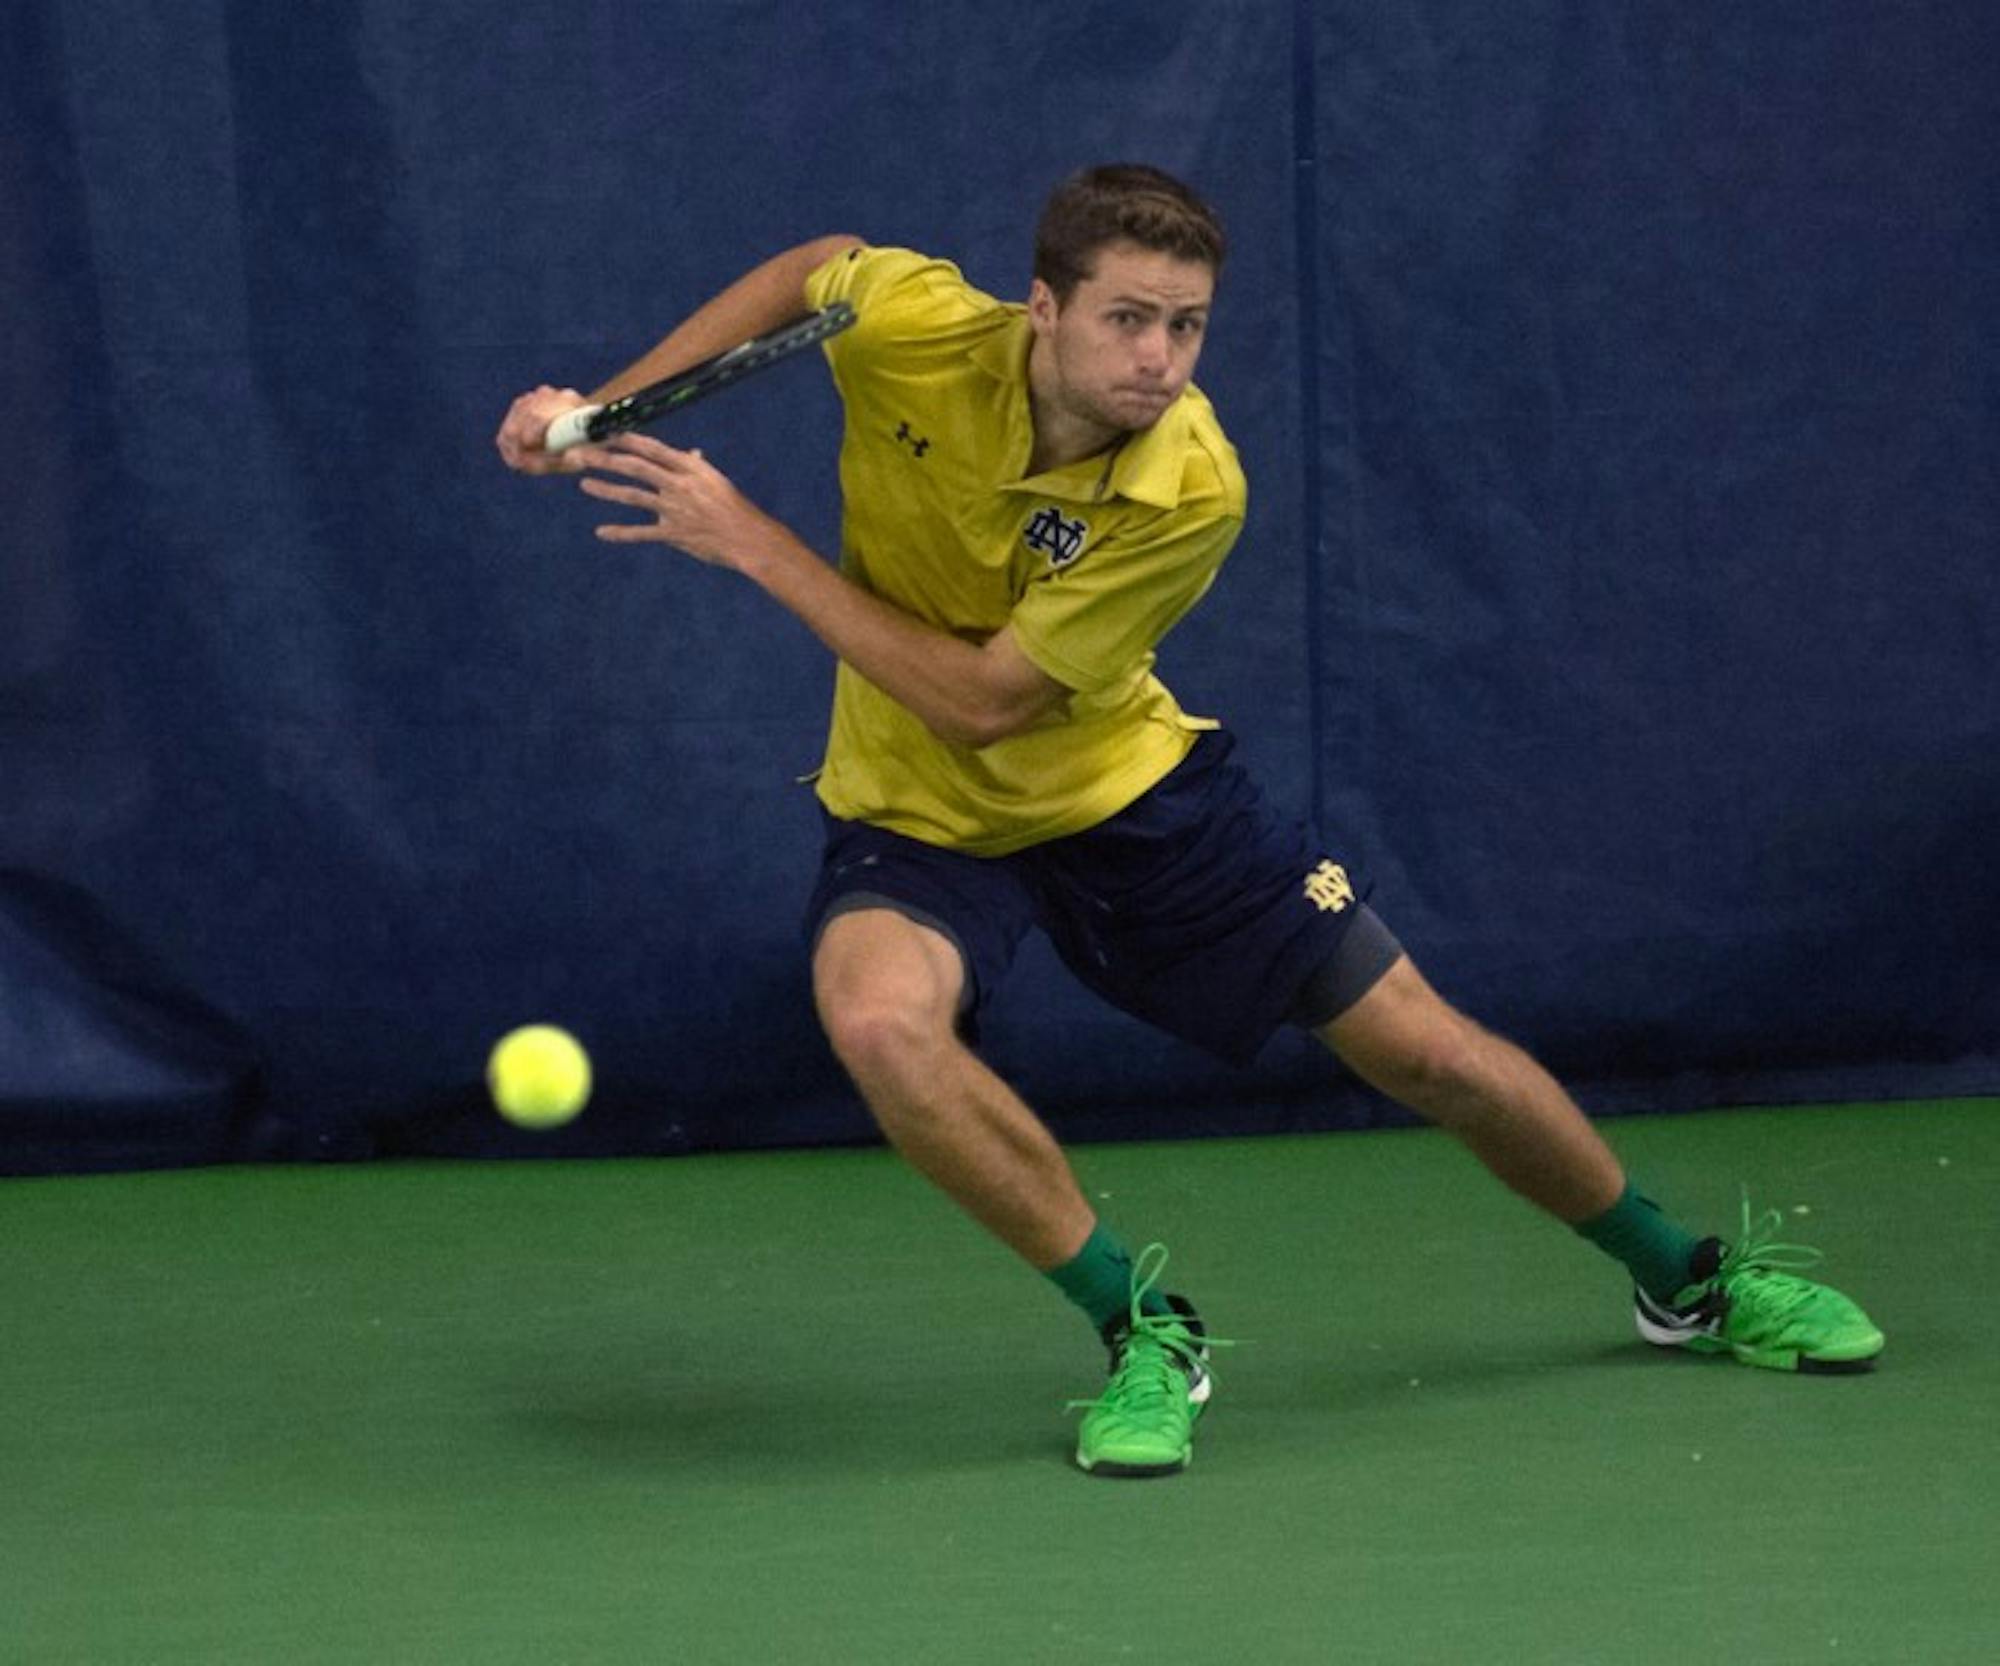 Irish senior Quentin Monaghan looks to recovera during Notre Dame’s 5-2 victory over Duke on Feb. 28 at Eck Tennis Pavilion.